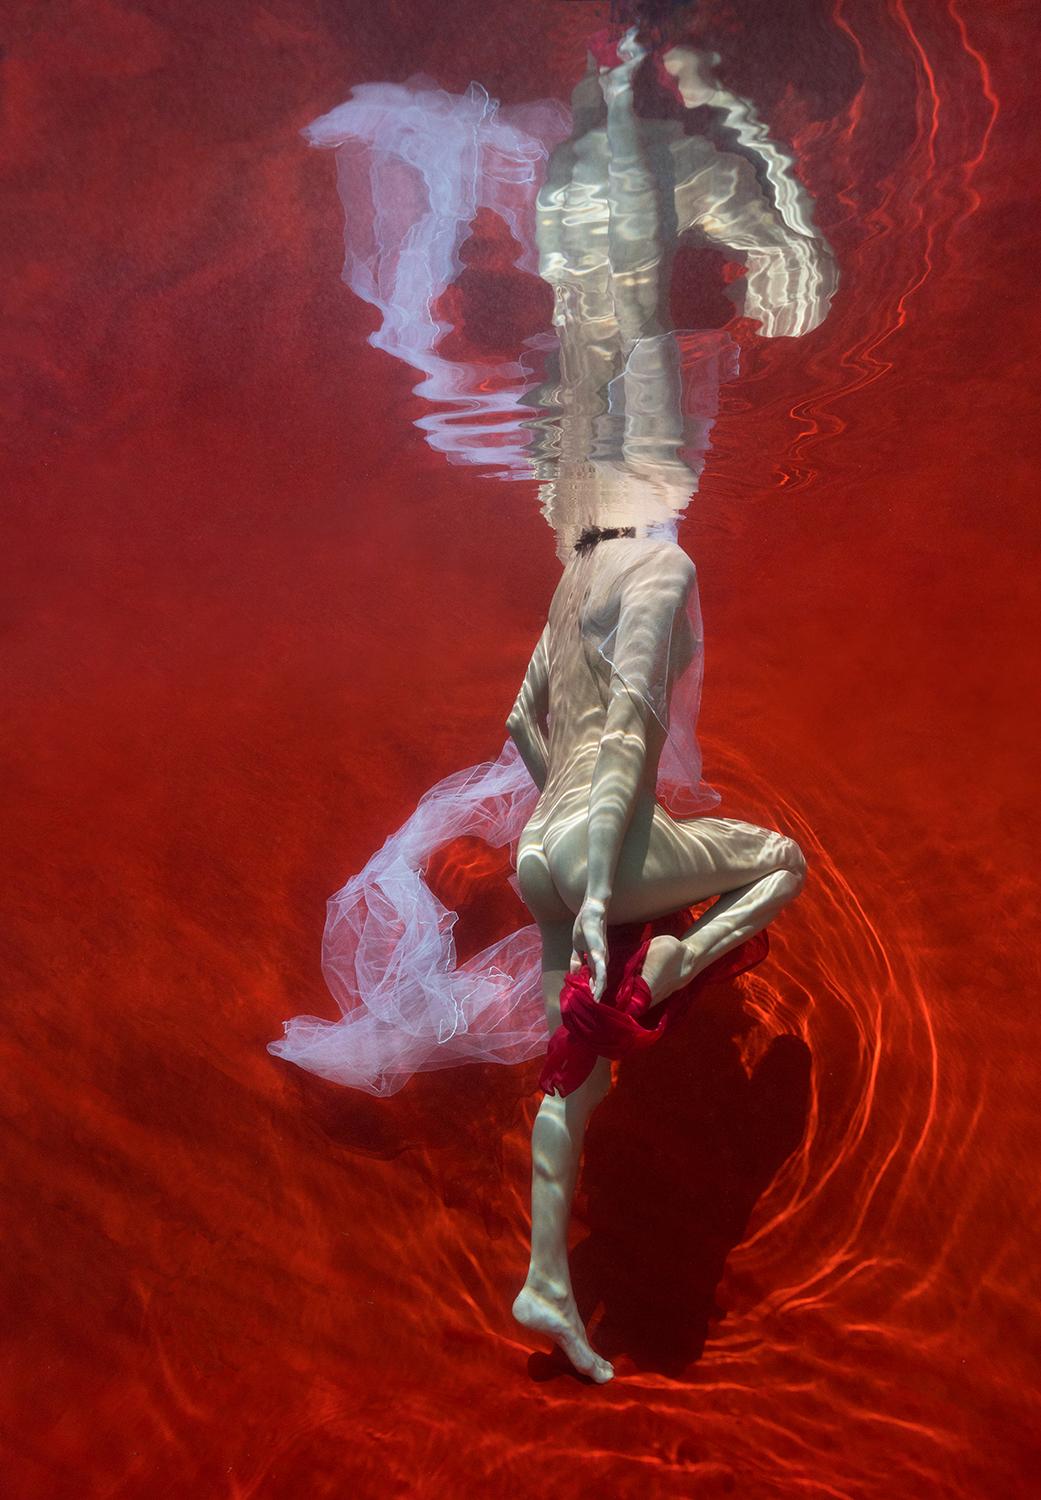 Alex Sher Nude Photograph - Blood and Milk VII  - underwater nude photograph, archival print on paper 16x23"